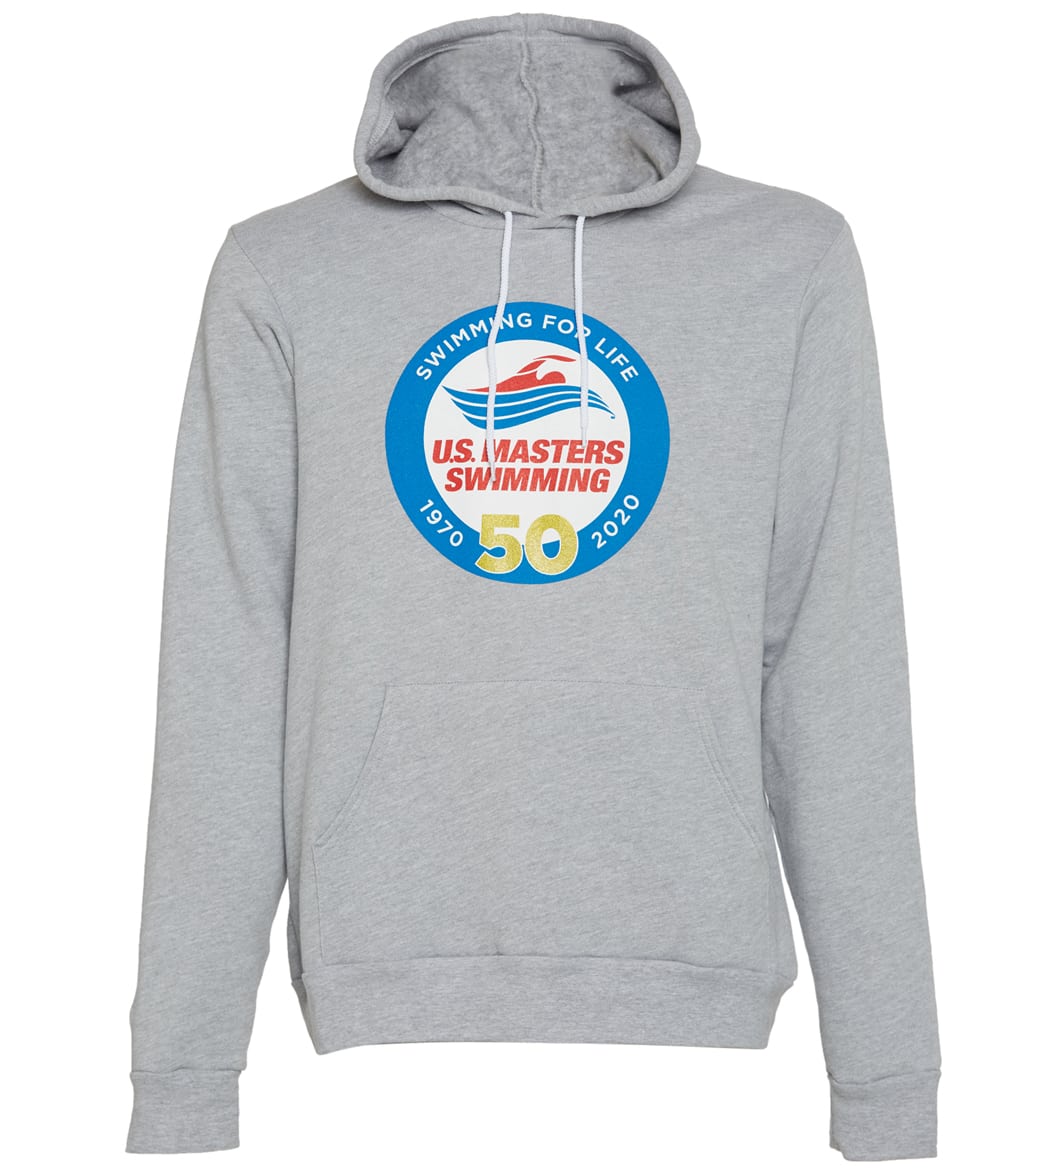 U.s. Masters Swimming Usms 50Th Anniversary Men's Pullover Hoodie - Heather Grey Xs Size X-Small Cotton/Polyester - Swimoutlet.com